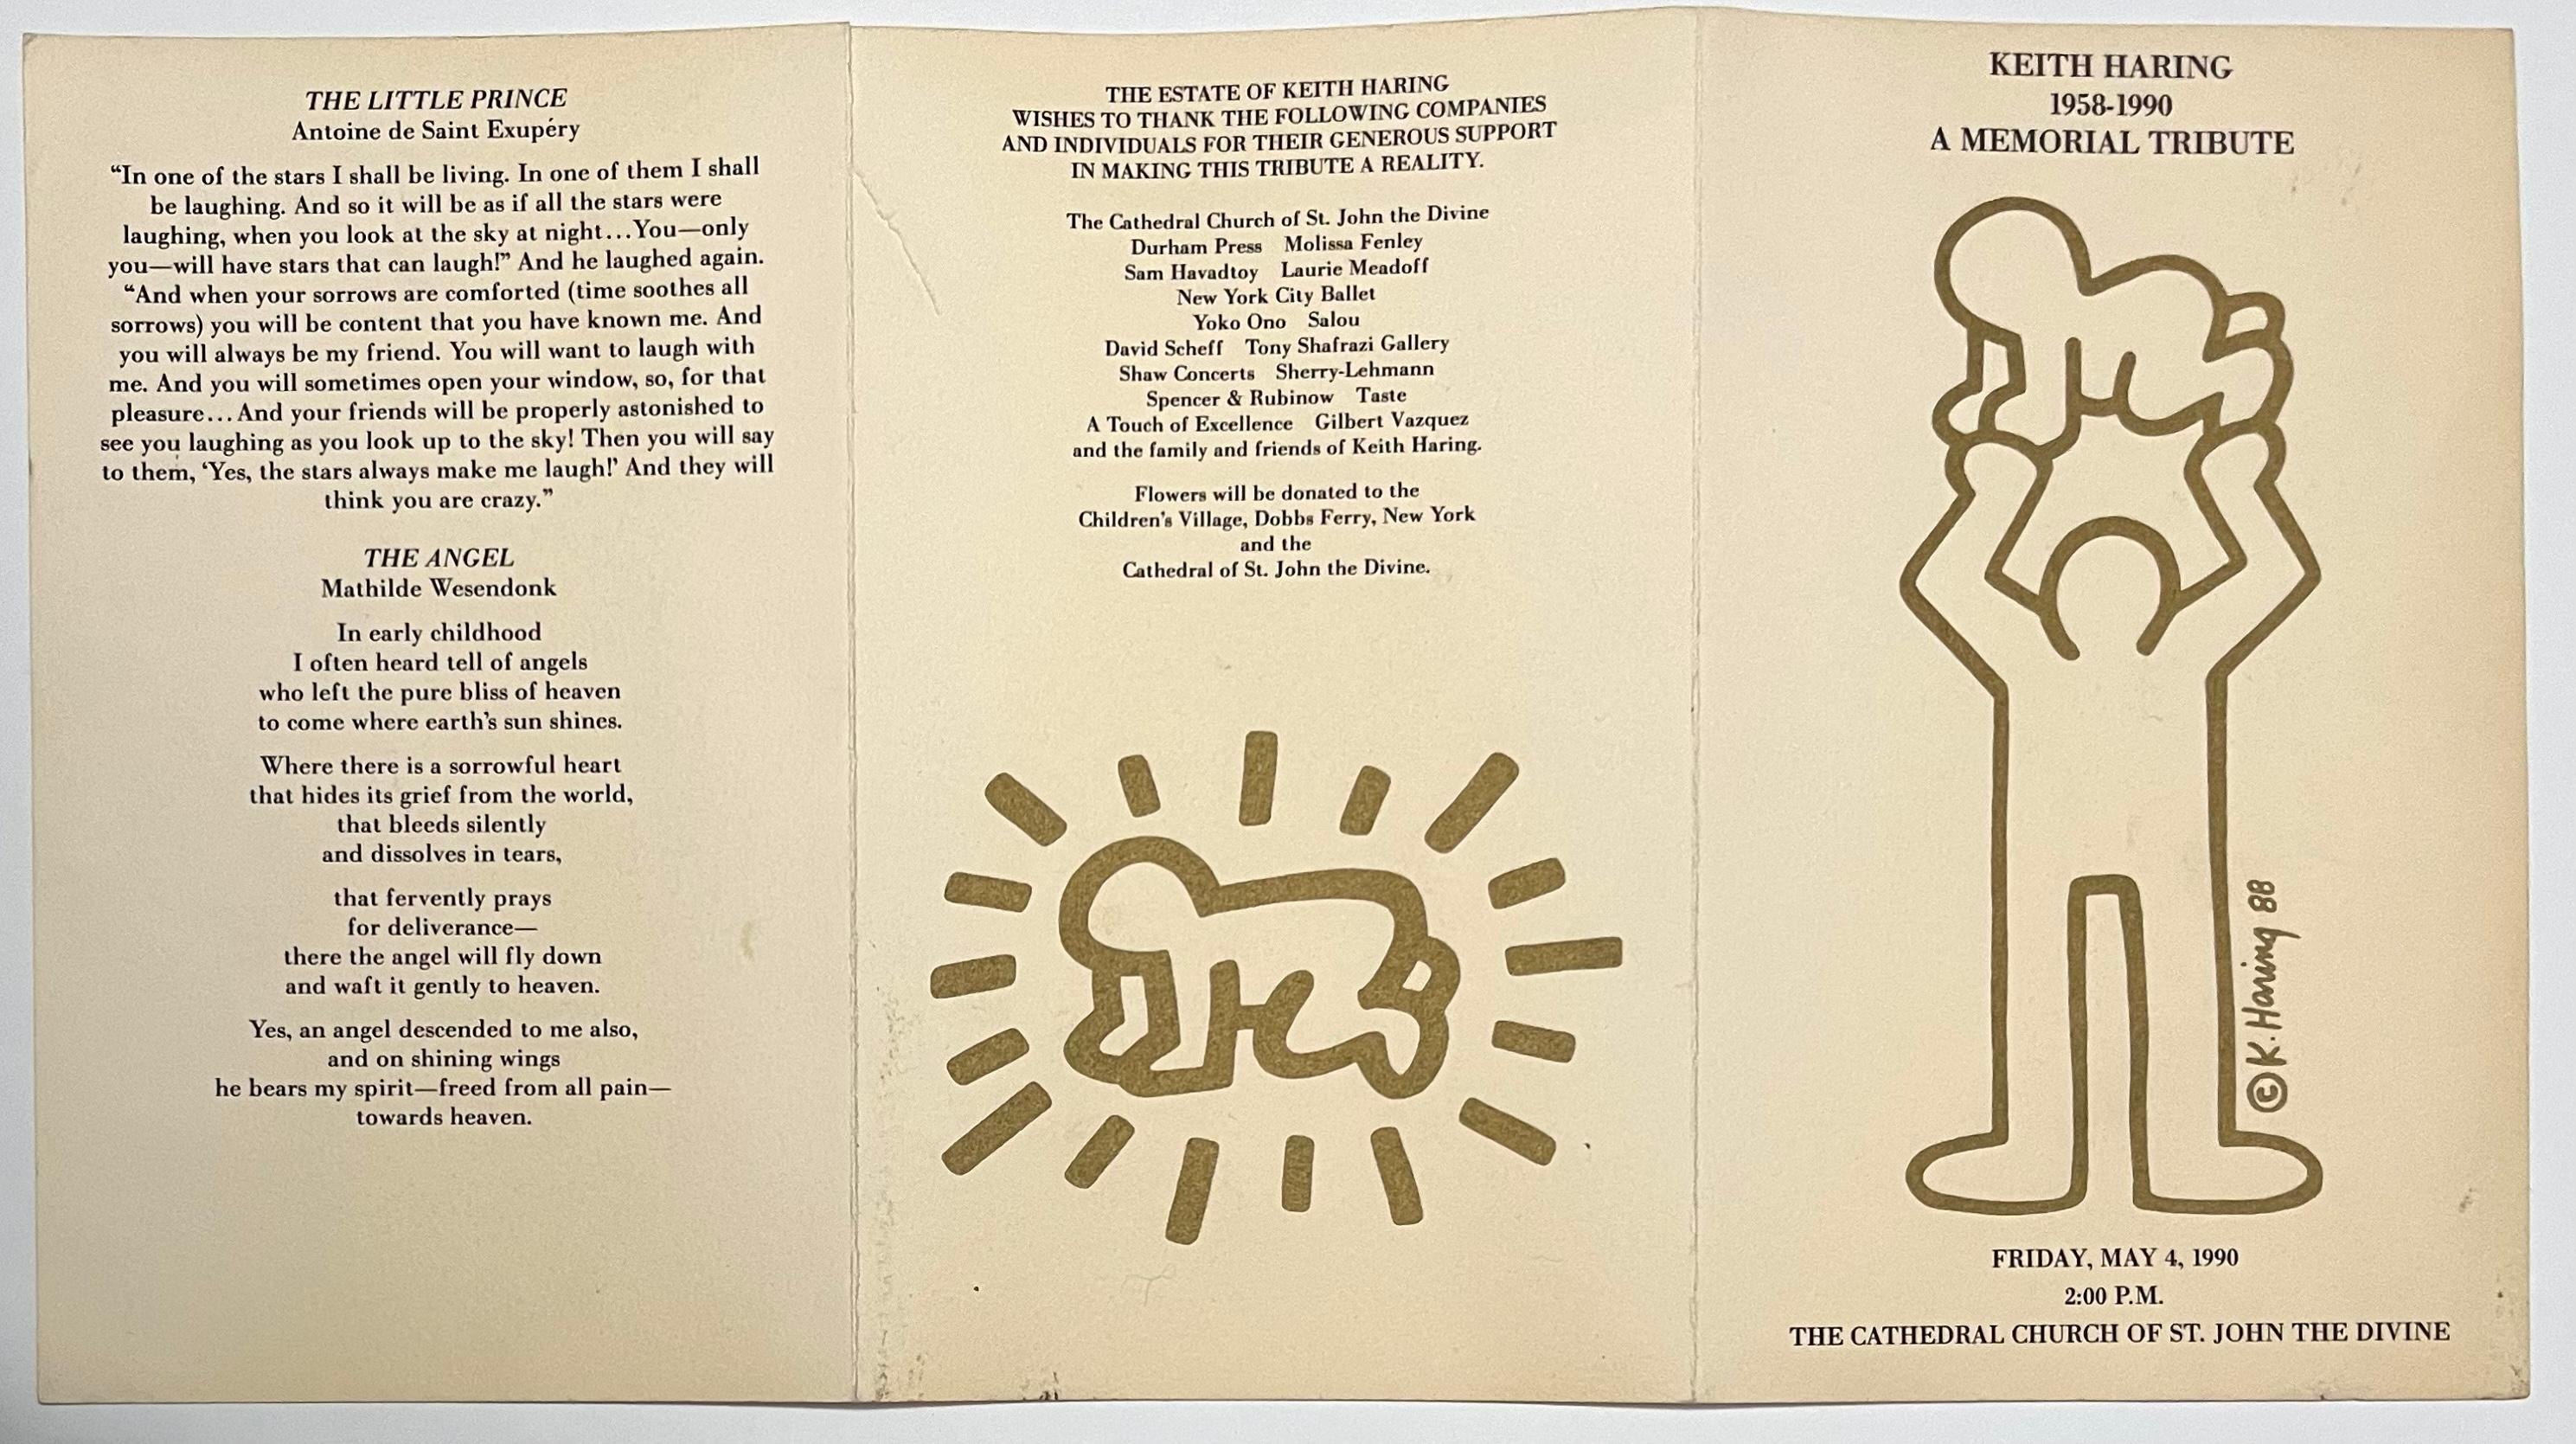 Keith Haring A Memorial Tribute 1990:
Rare, historic silkscreened, folding invitation program featuring double-sided, gold-foiled artwork - published on the occasion of Keith Haring’s memorial service; held, May 4, 1990 (on Haring’s birthday) at the